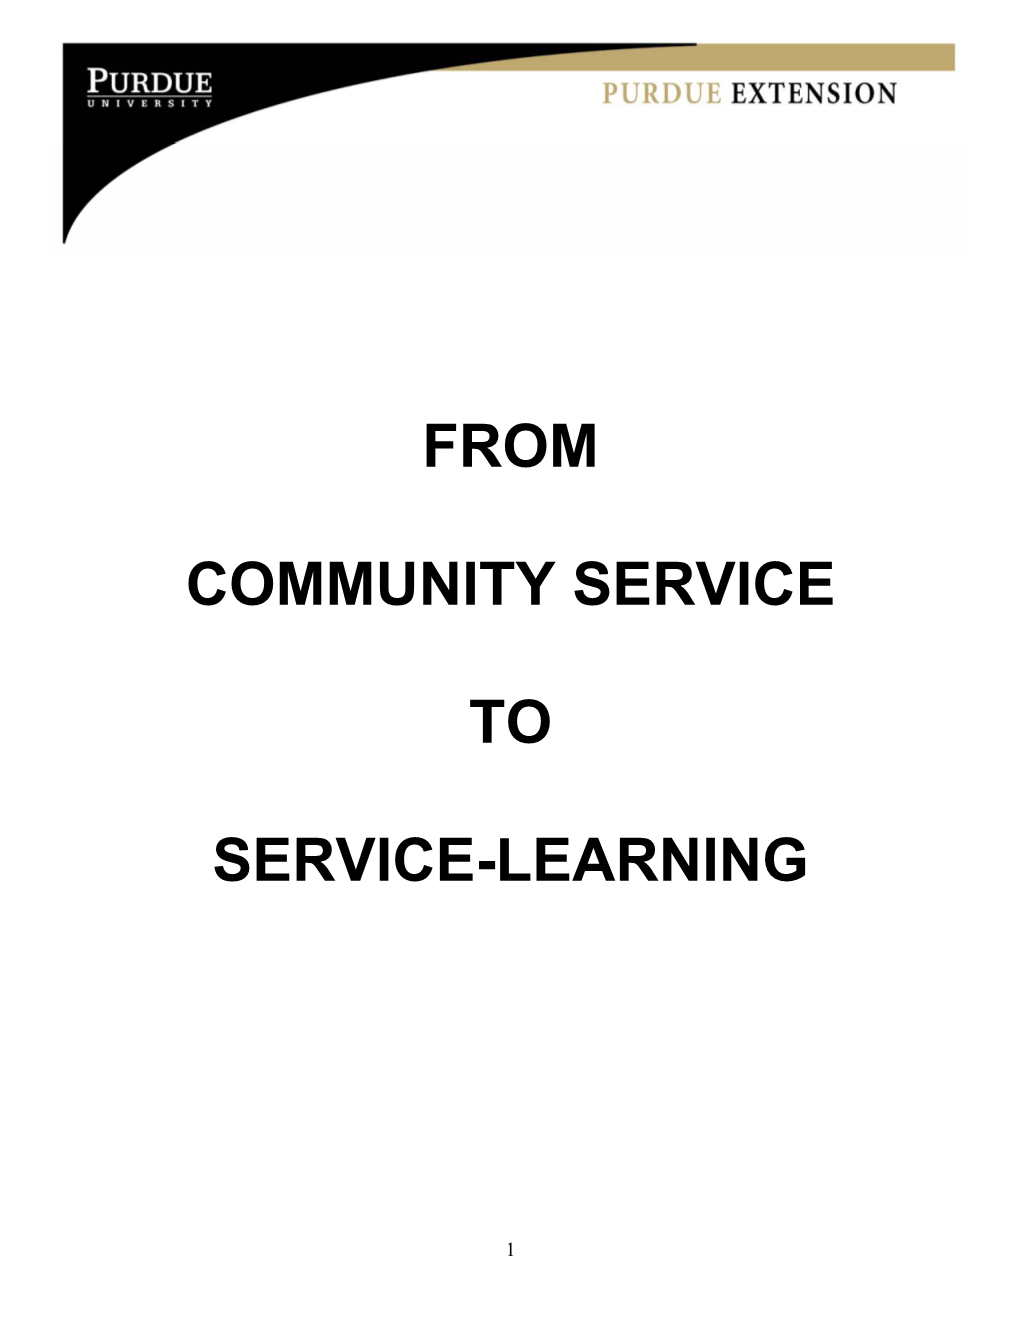 From Community Service to Service-Learning